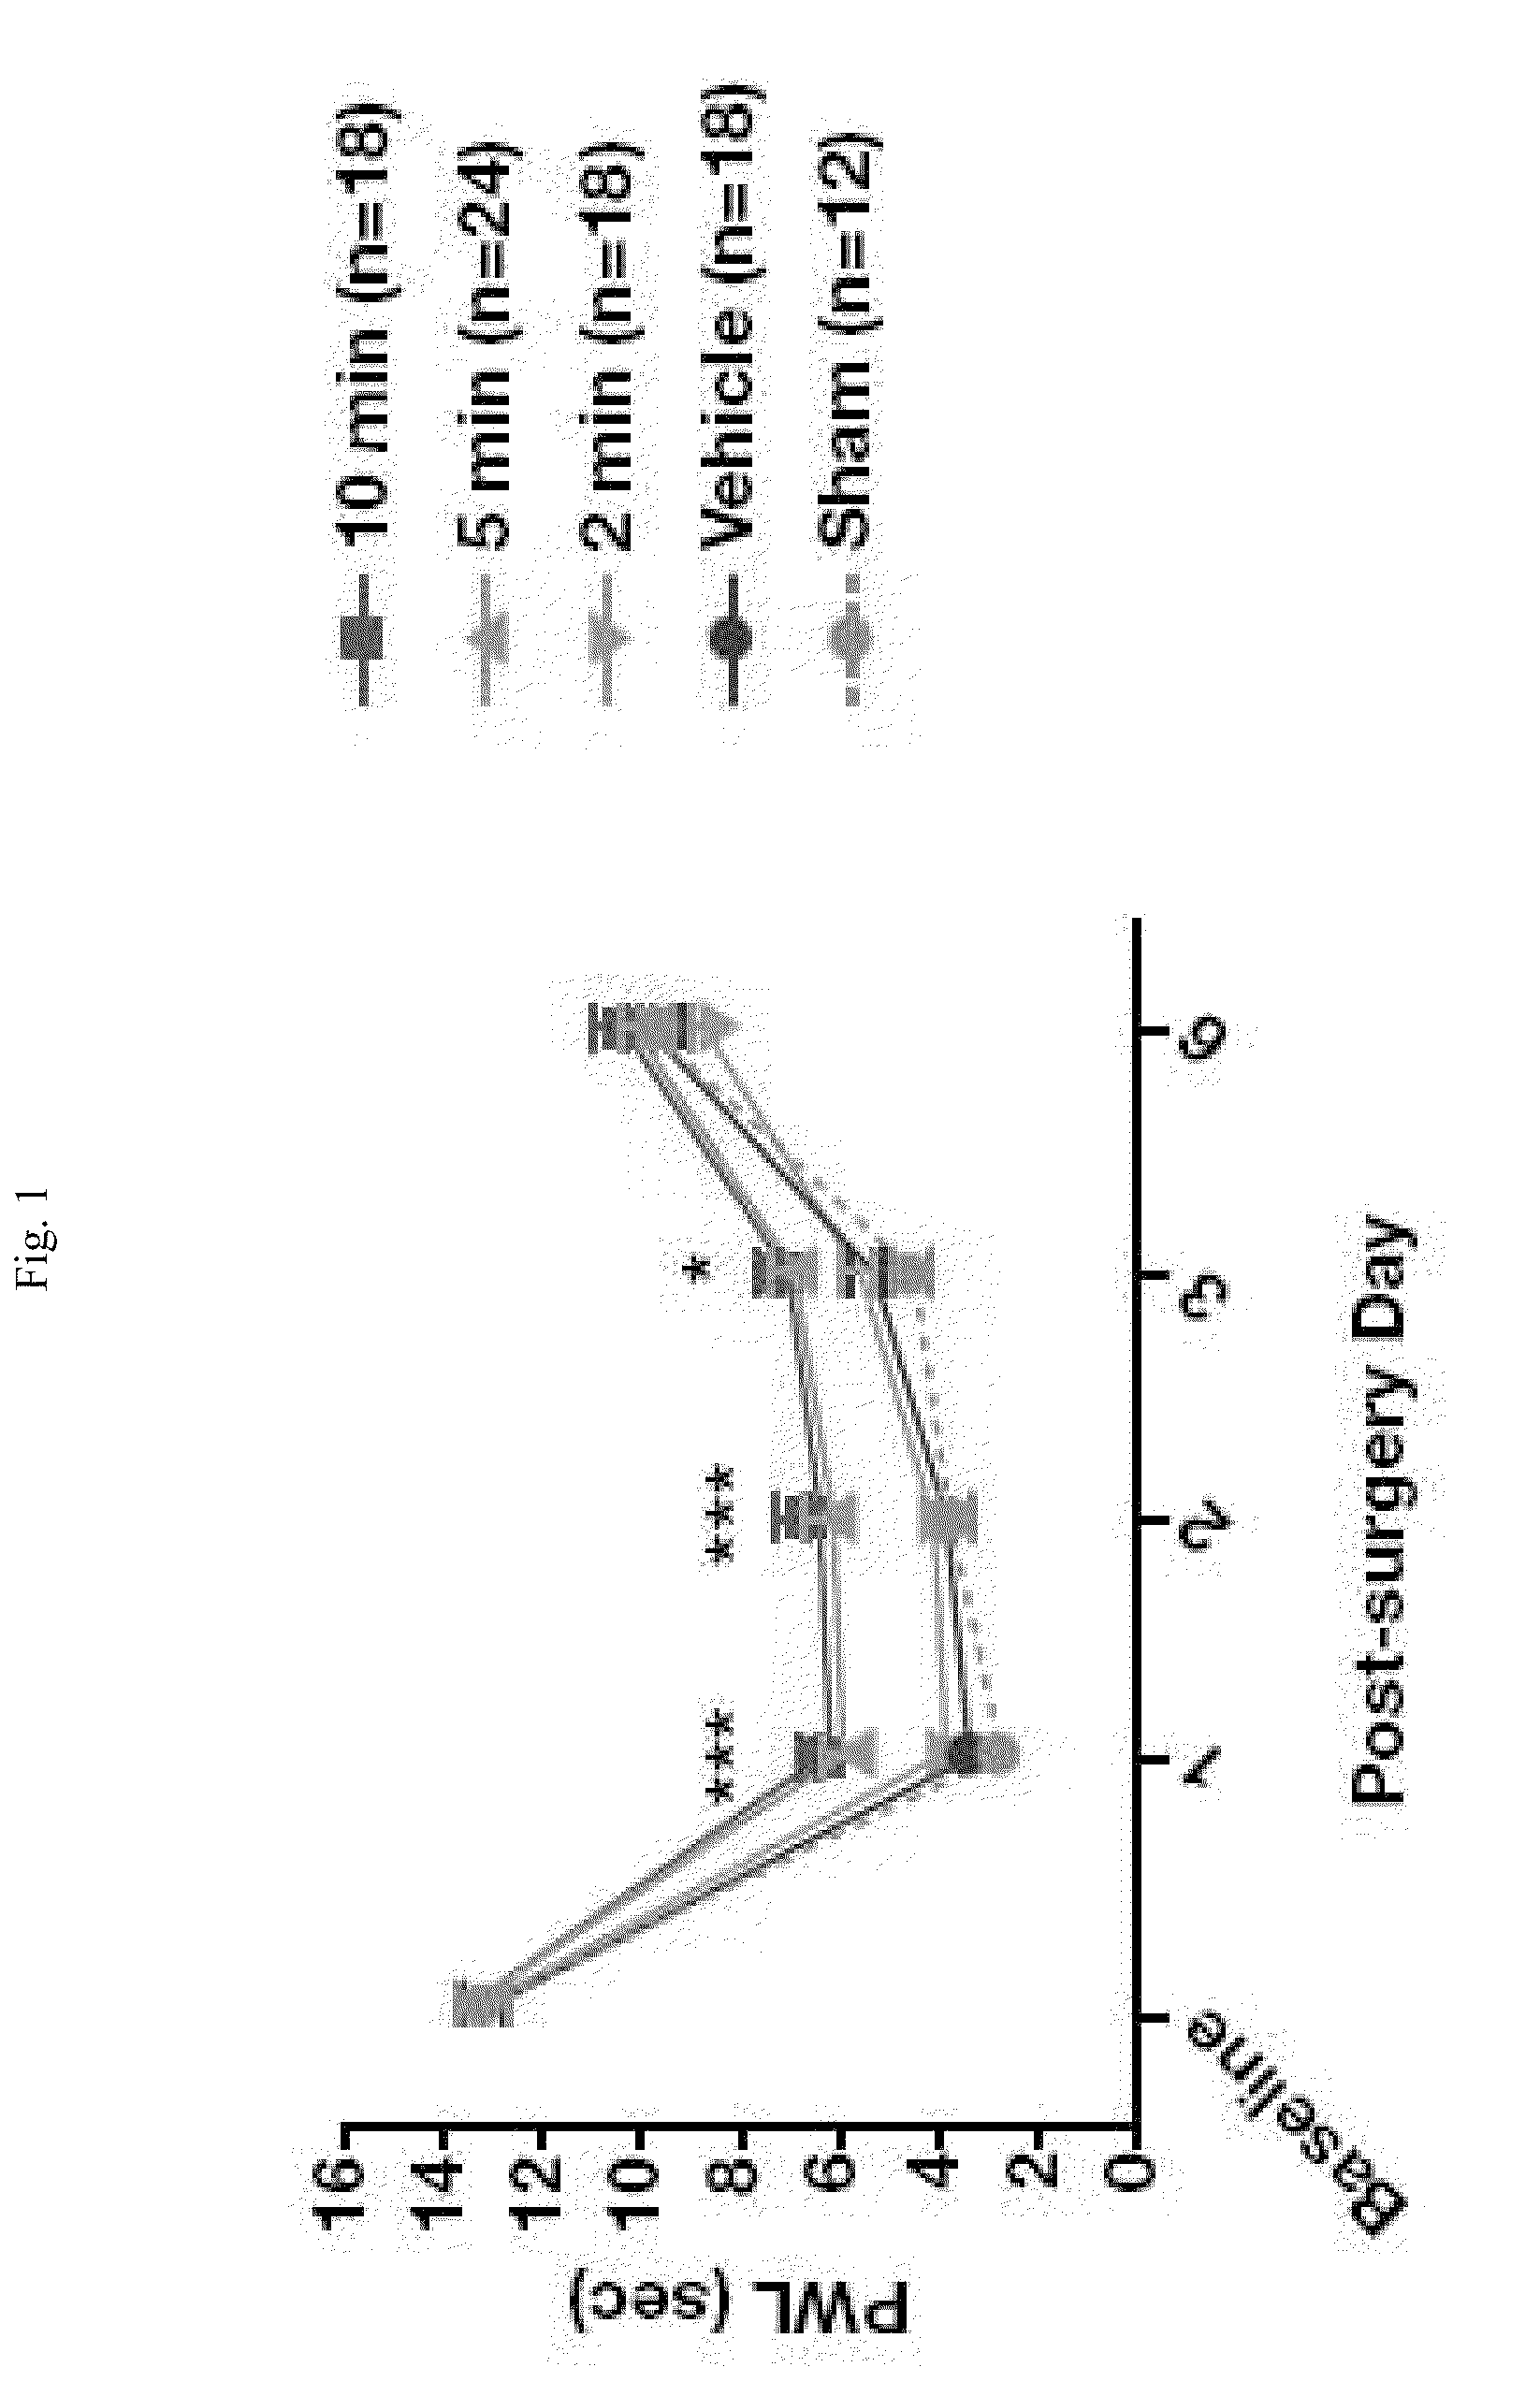 Instillation Administration of Capsaicinoids for the Treatment of Pain